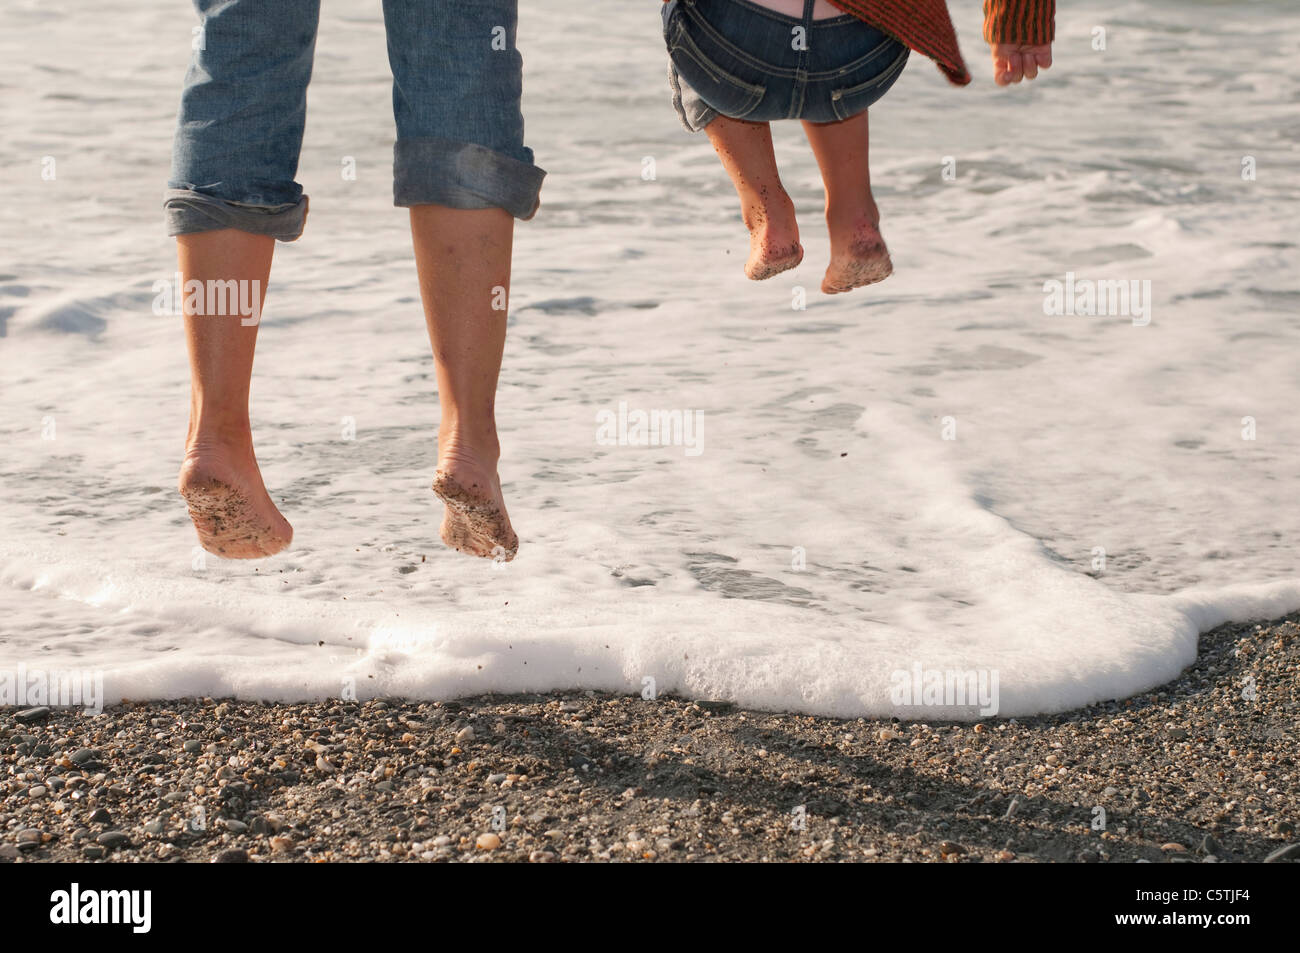 New Zealand, Okarito, Persons on shore, fooling about, low section Stock Photo